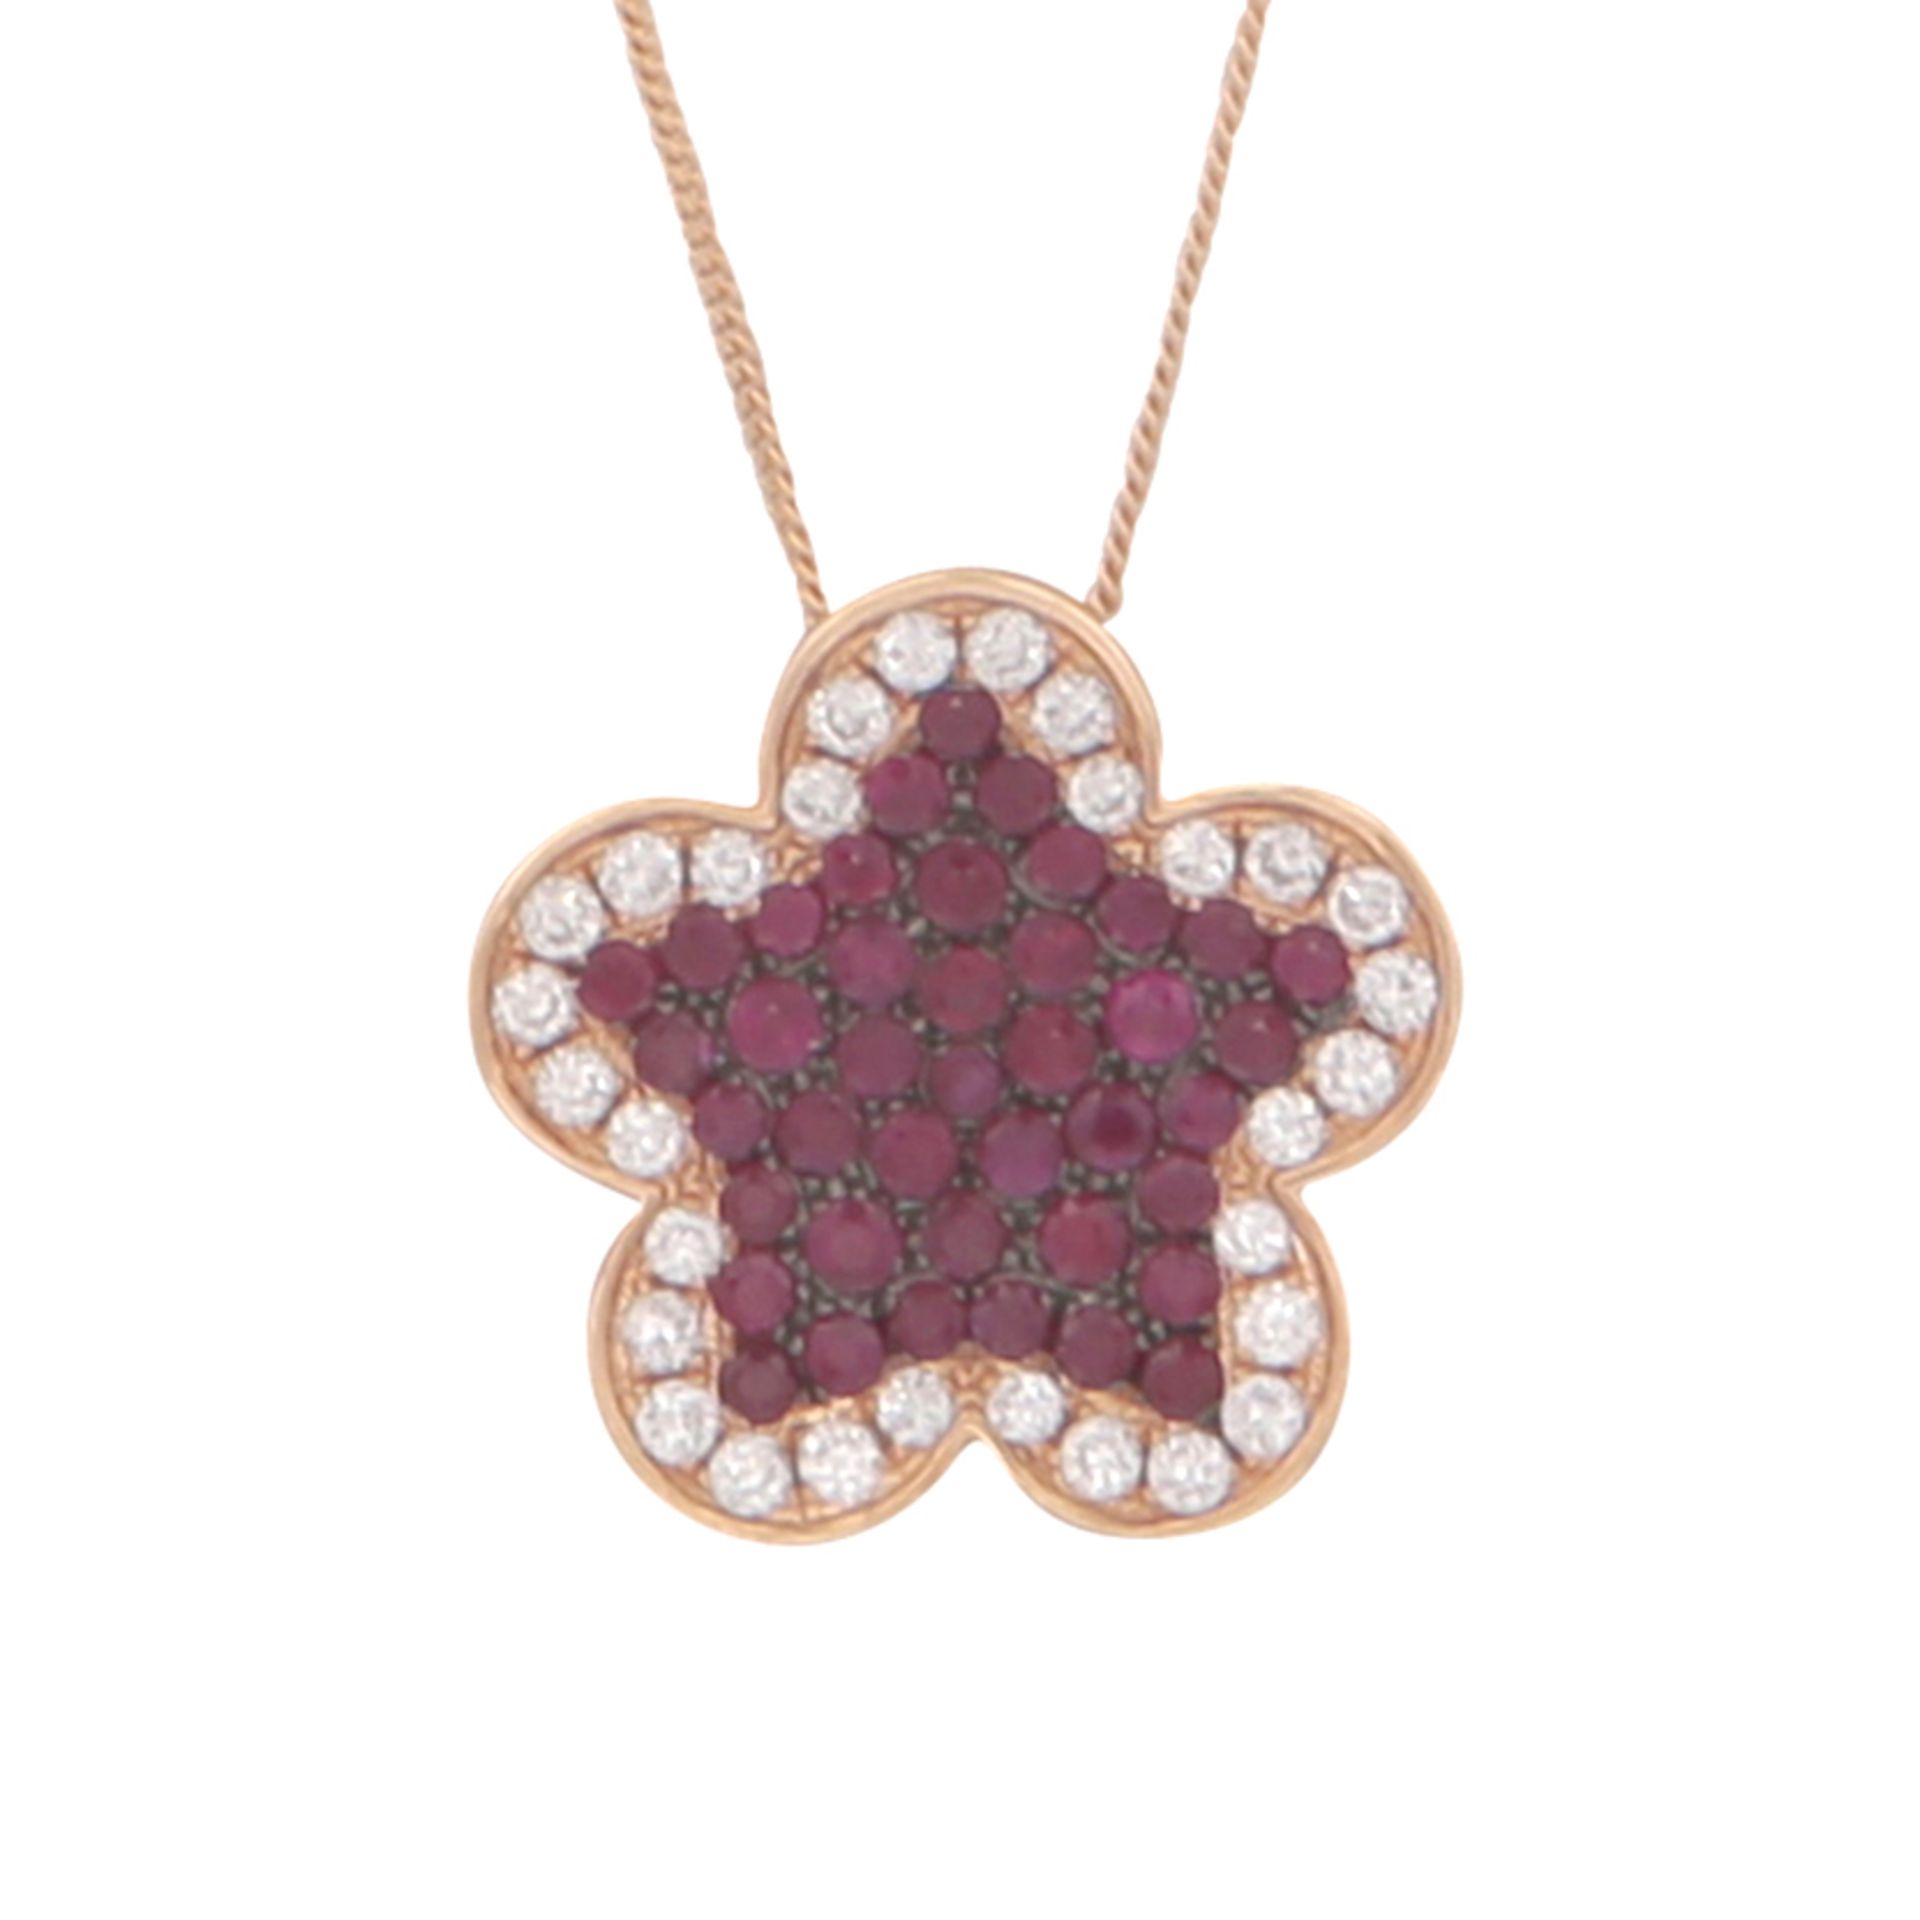 A ruby and diamond pendant and chain 18ct yellow gold designed as a five petal flower set with a